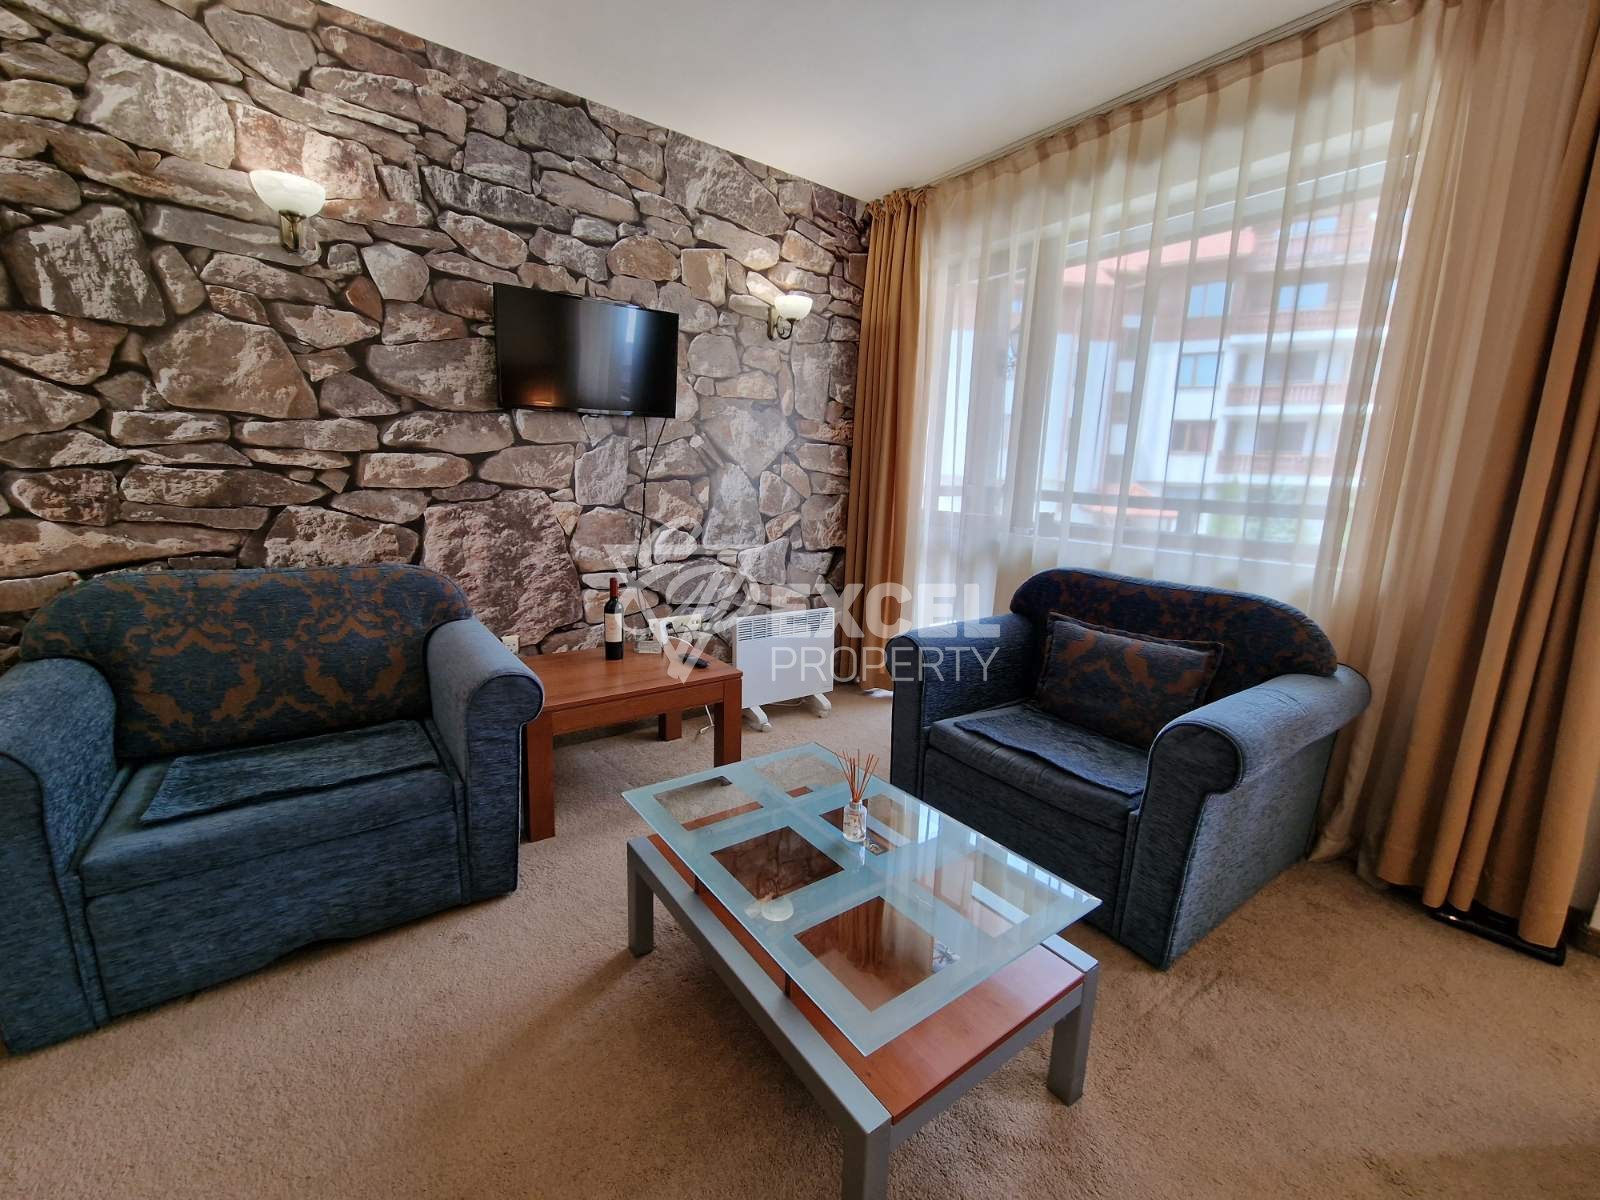 For rent: Furnished studio with air conditioning and terrace in Bansko, next to Kempinski